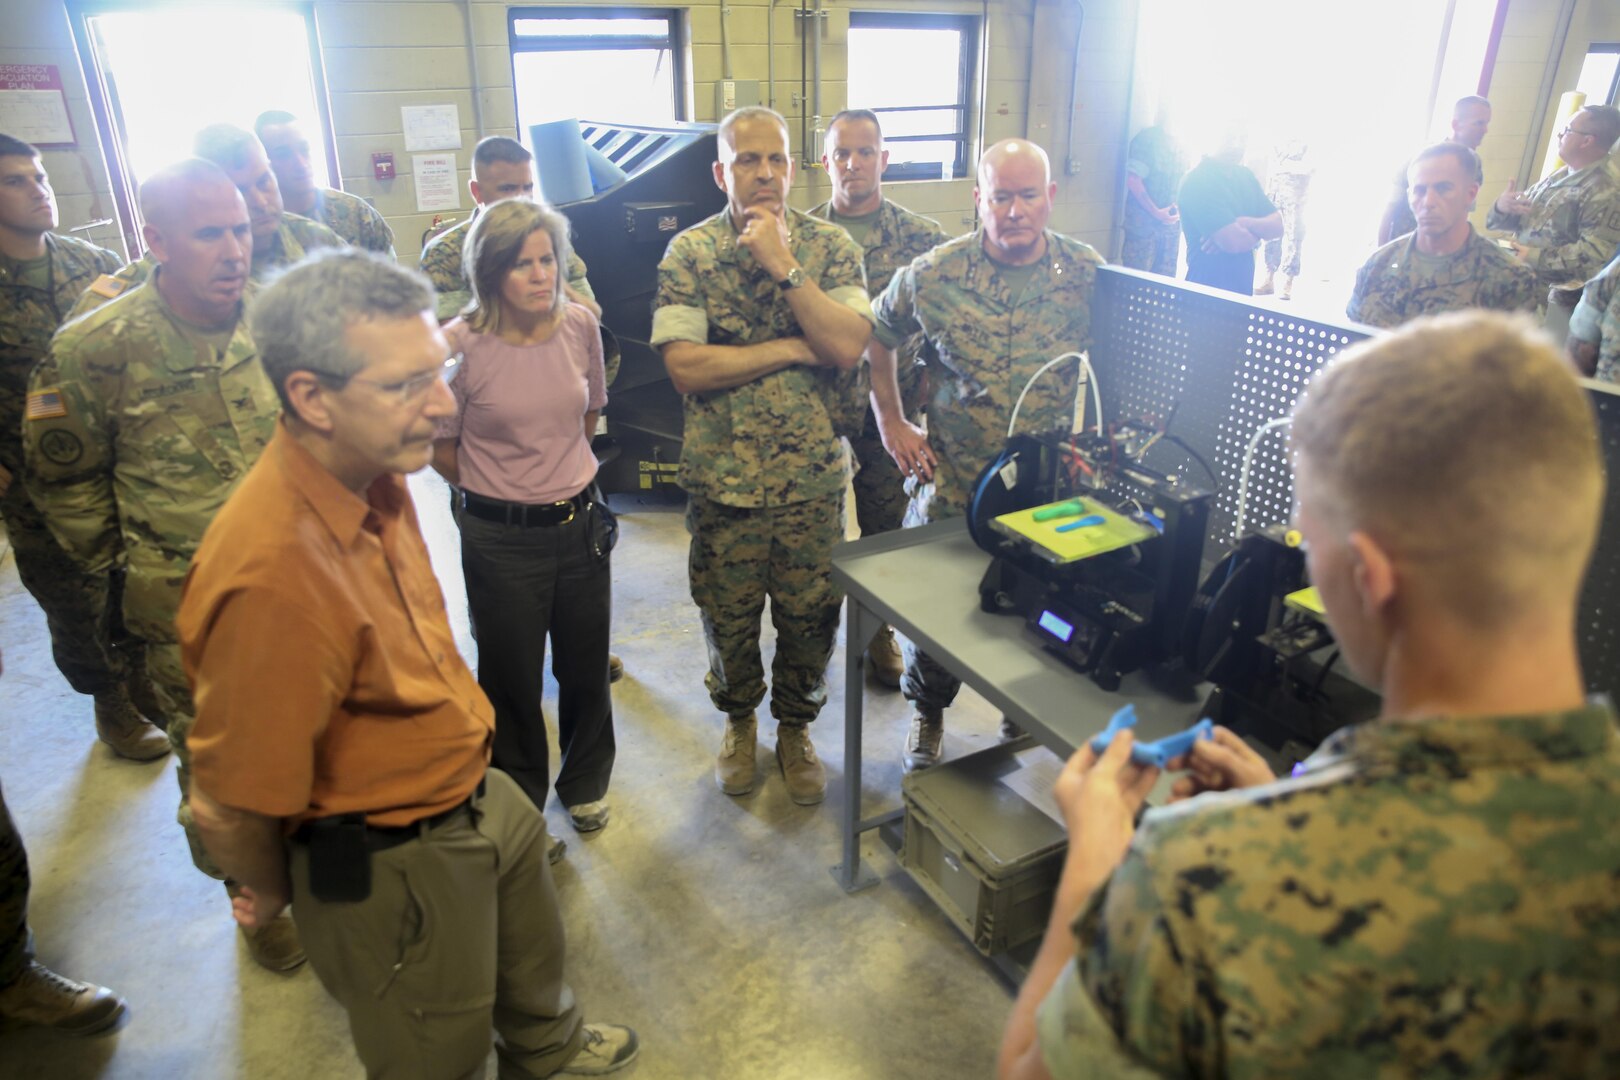 Alan Estevez, left, Principal Deputy under Secretary of Defense for Acquisition, Technology and Logistics, Kristin French, center-left, Principal Deputy under Secretary of Defense for Logistics and Material  readiness, and Lt. Gen. Michael Dana, center, Deputy Commandant of Installations and Logistics, observe a demonstration of 3D printing and additive manufacturing at Camp Lejeune, N.C., Aug. 17. Additive manufacturing can recreate small parts for vehicles and other equipment, which allows for faster reparations. The group visited several units throughout II Marine Expeditionary Force to receive a first-hand look at technological innovation helping to advance logistics operations. (U.S. Marine Corps photo by Sgt. Lucas Hopkins)